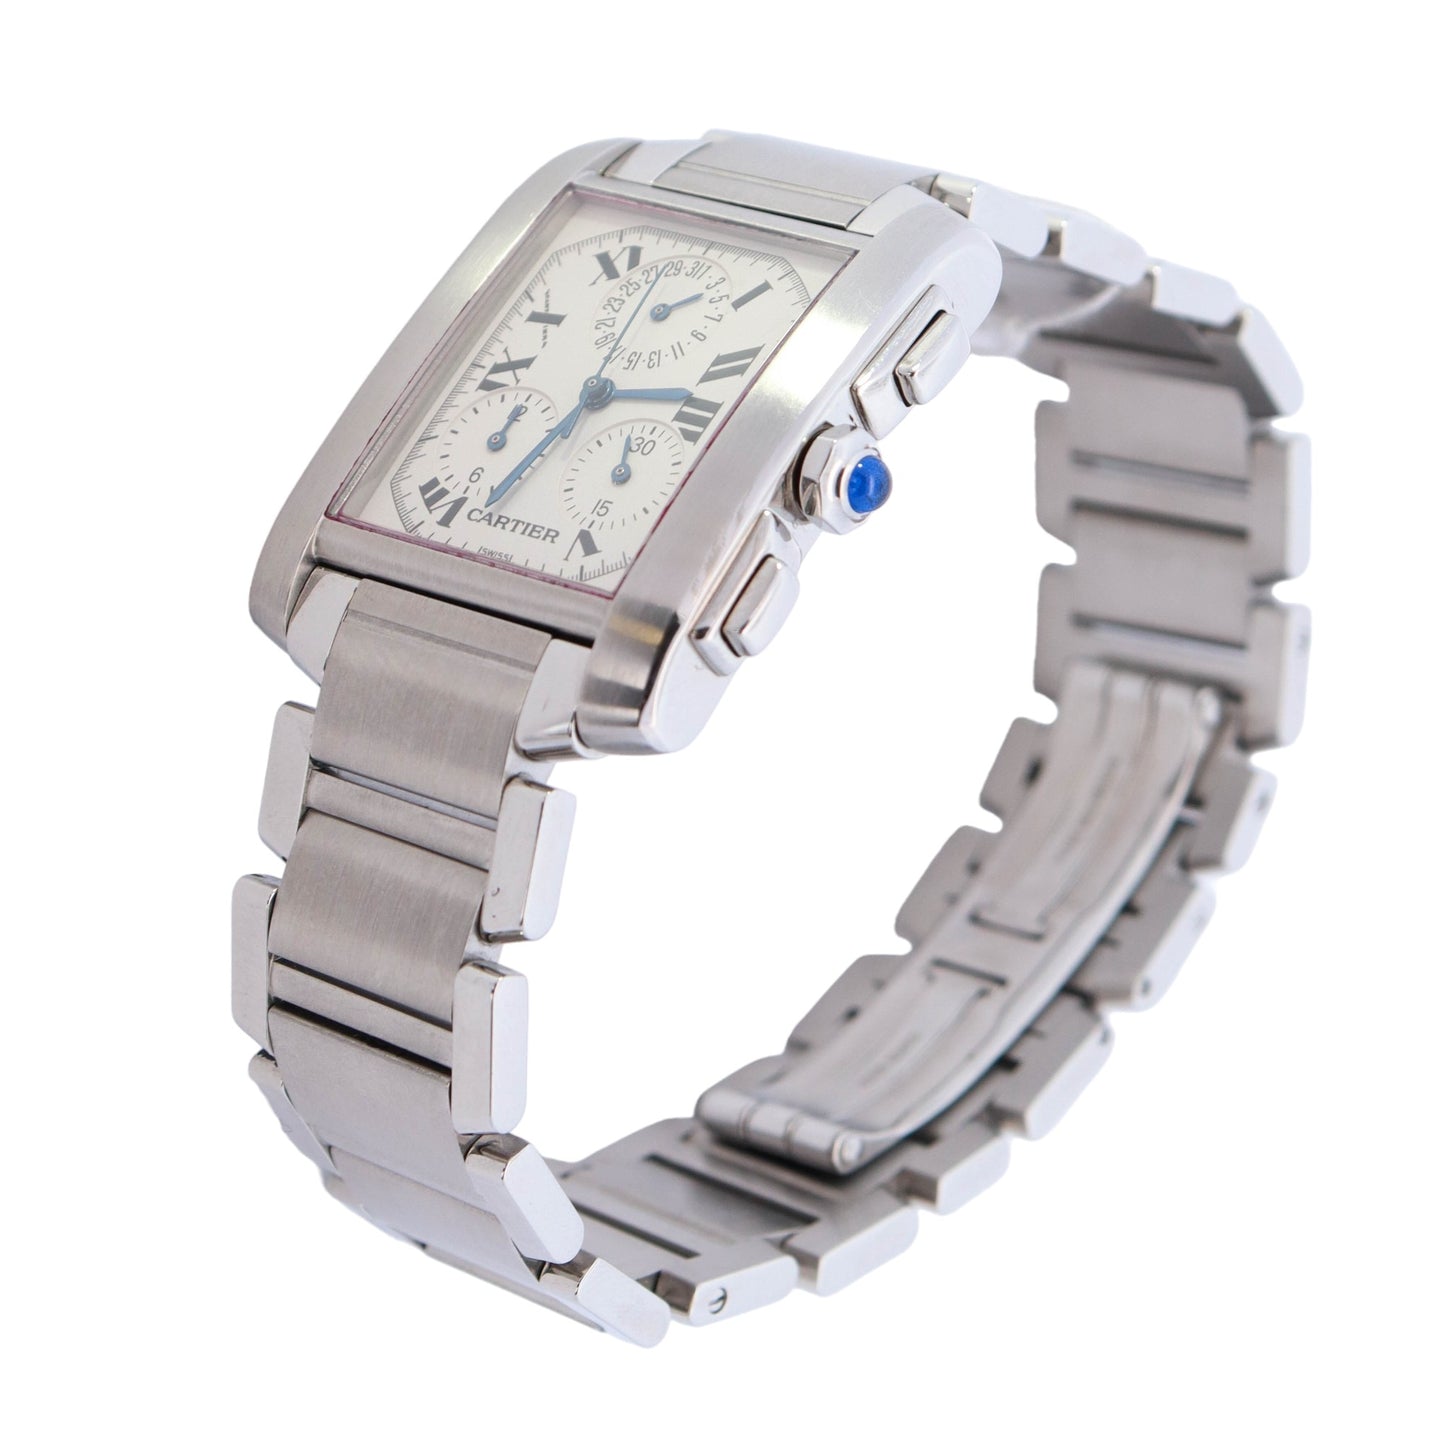 Cartier Tank Francaise Stainless Steel 28x37mm White Roman Dial Watch Reference #: W51001Q3 - Happy Jewelers Fine Jewelry Lifetime Warranty